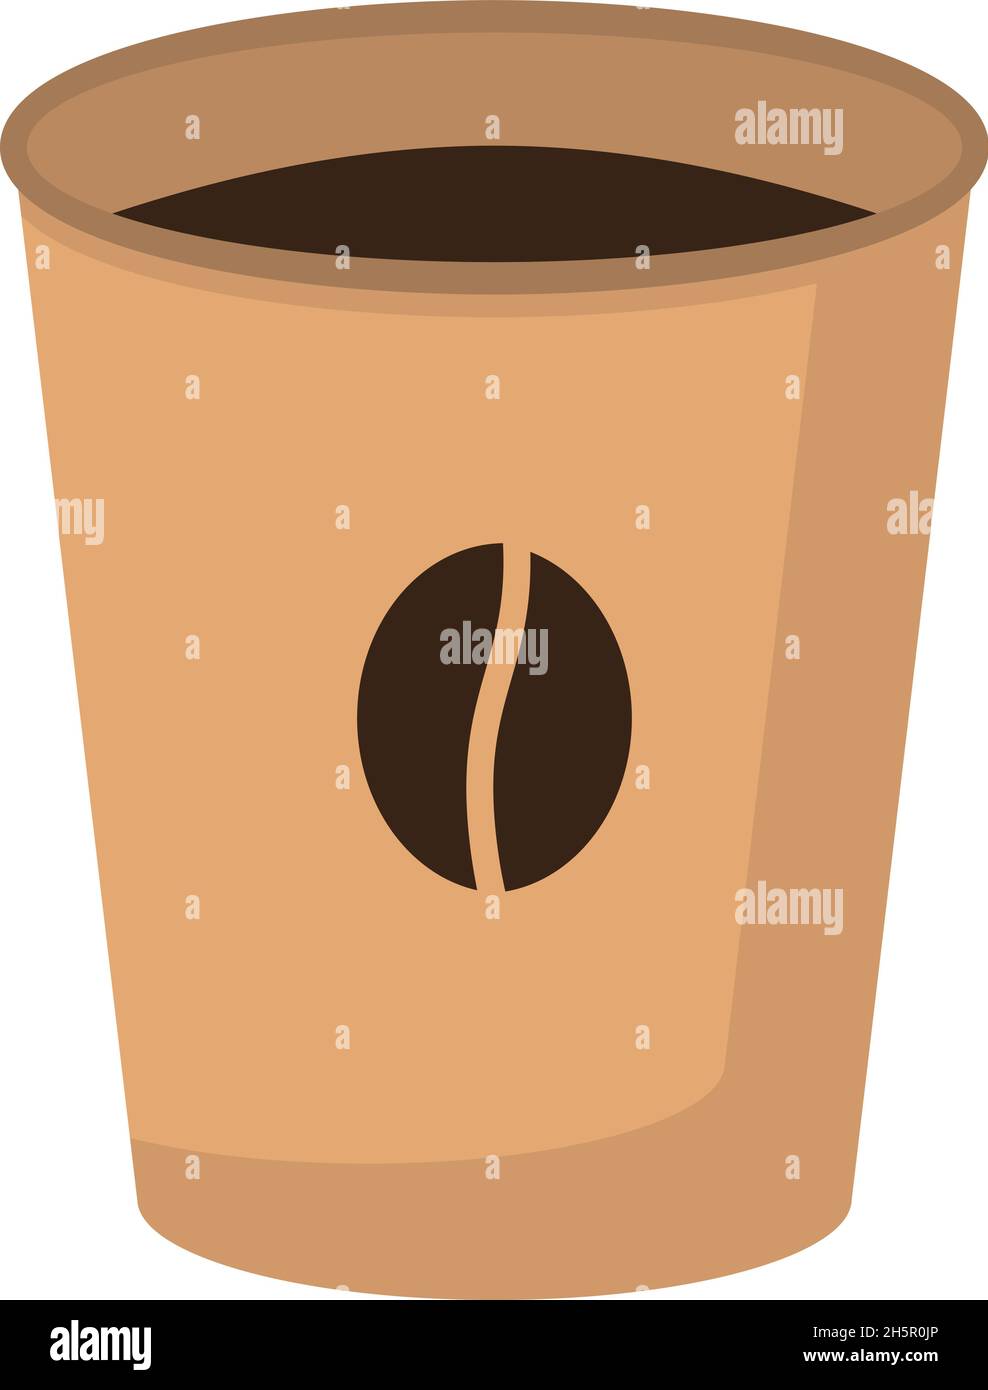 Cartoon Drink In A Plastic Cup Vector Illustration Stock Illustration -  Download Image Now - Disposable Cup, Red, Vector - iStock